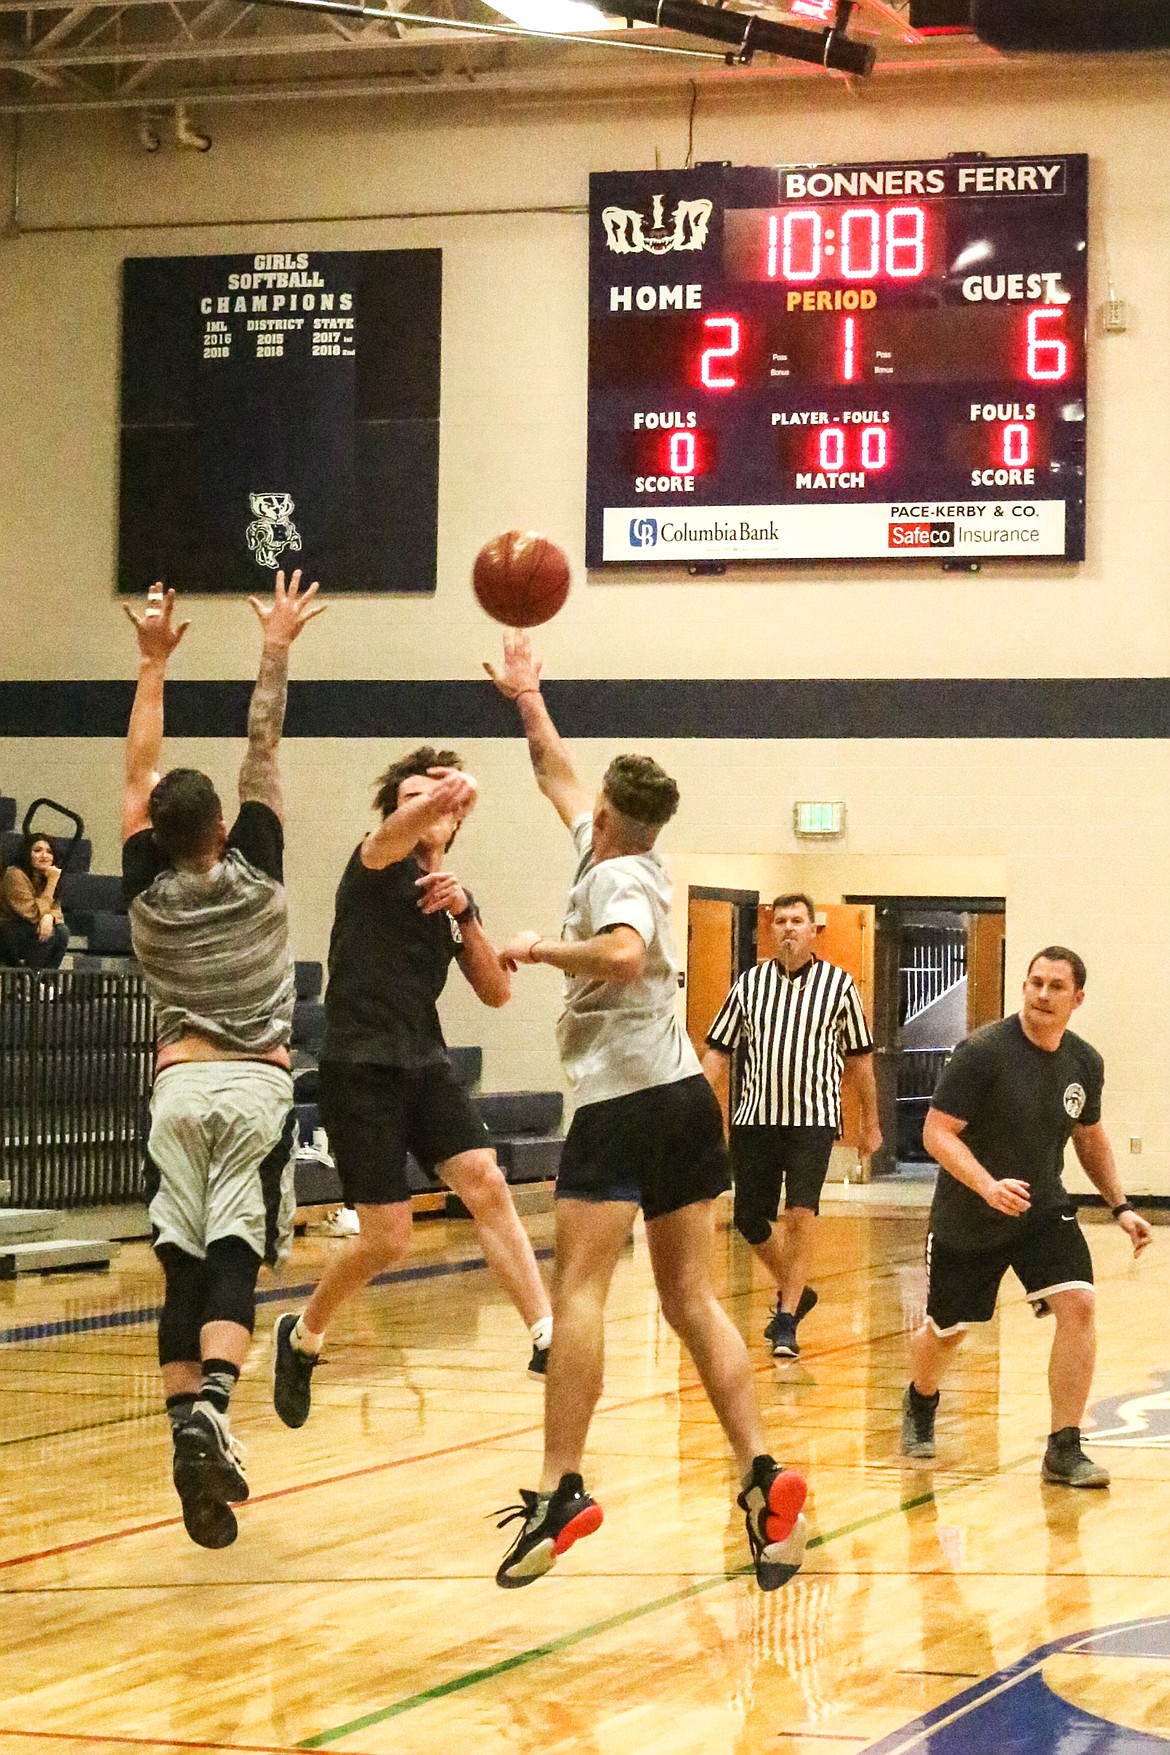 Photos by MANDI BATEMAN
Former Badger basketball players showed their skills, had fun connecting with old teammates, and helped raise money for the current basketball team at the second annual BFHS Alumni Tournament on Saturday, Dec. 28.